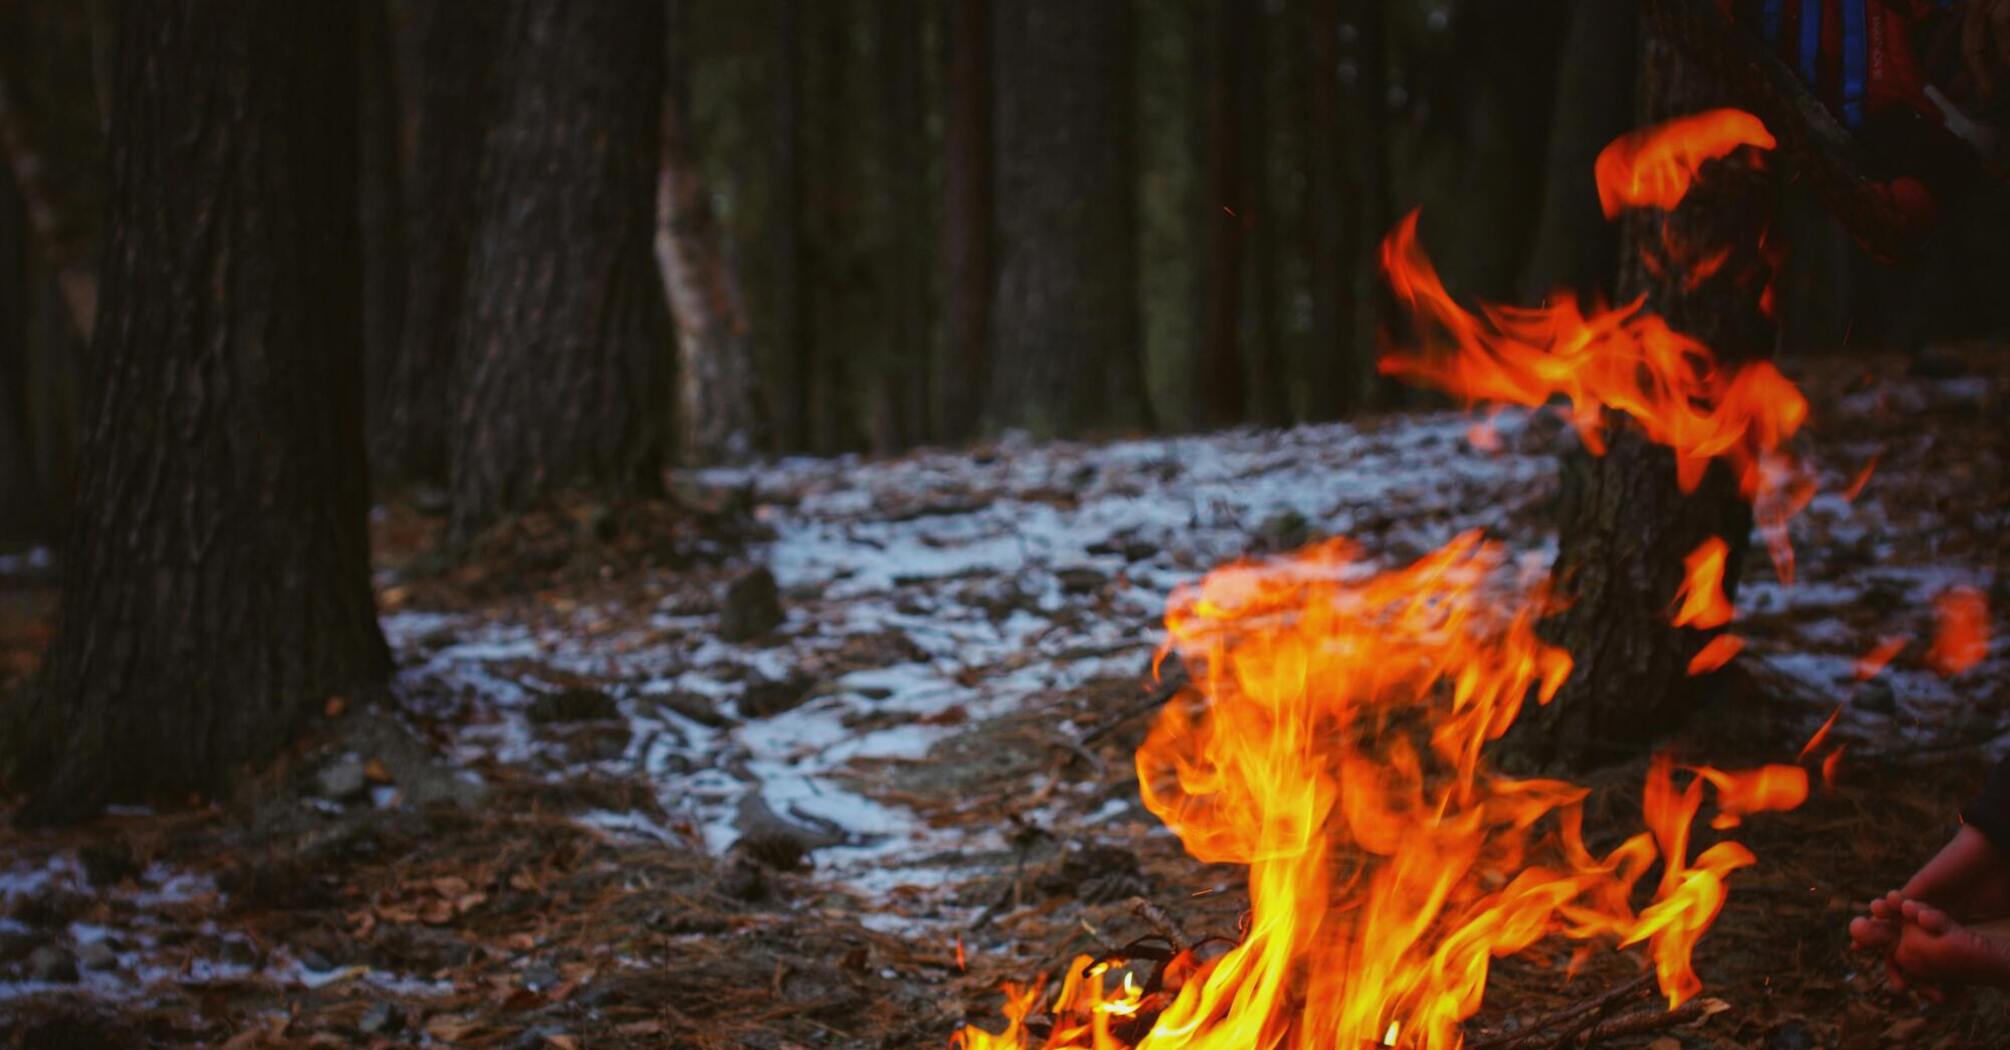 What are "zombie fires" terrorizing Canada, and why are scientists alarmed